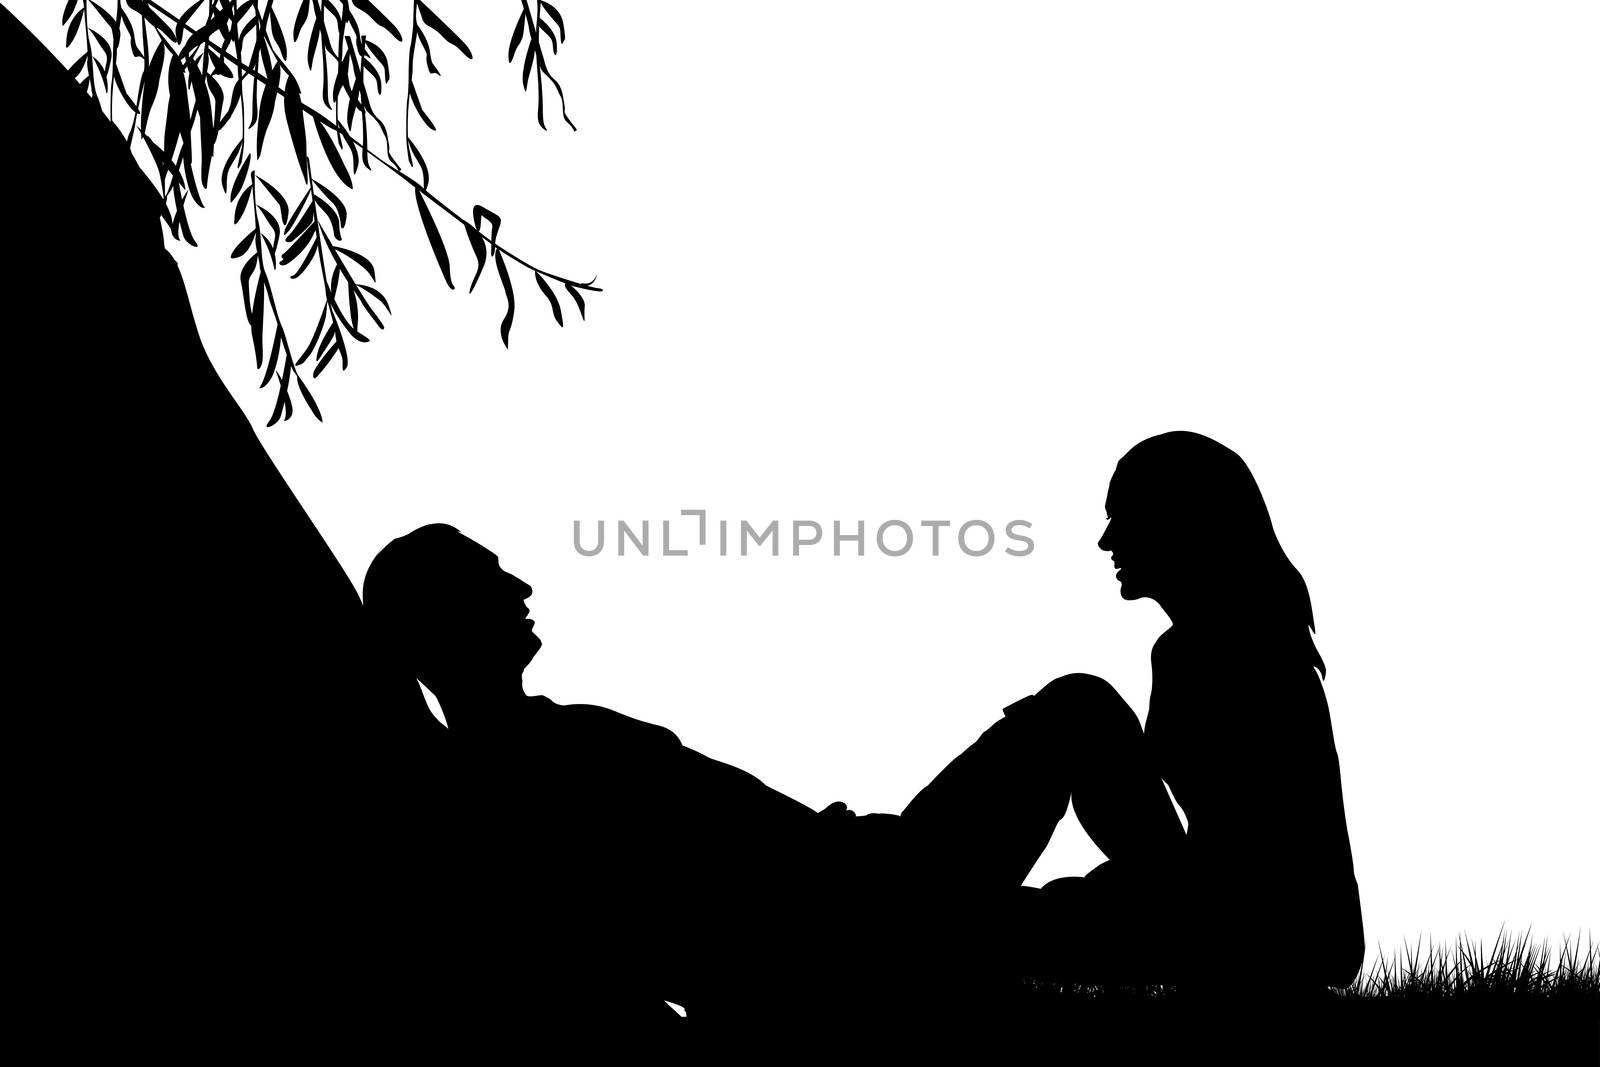 Lovers near a lake under a willow by hibrida13